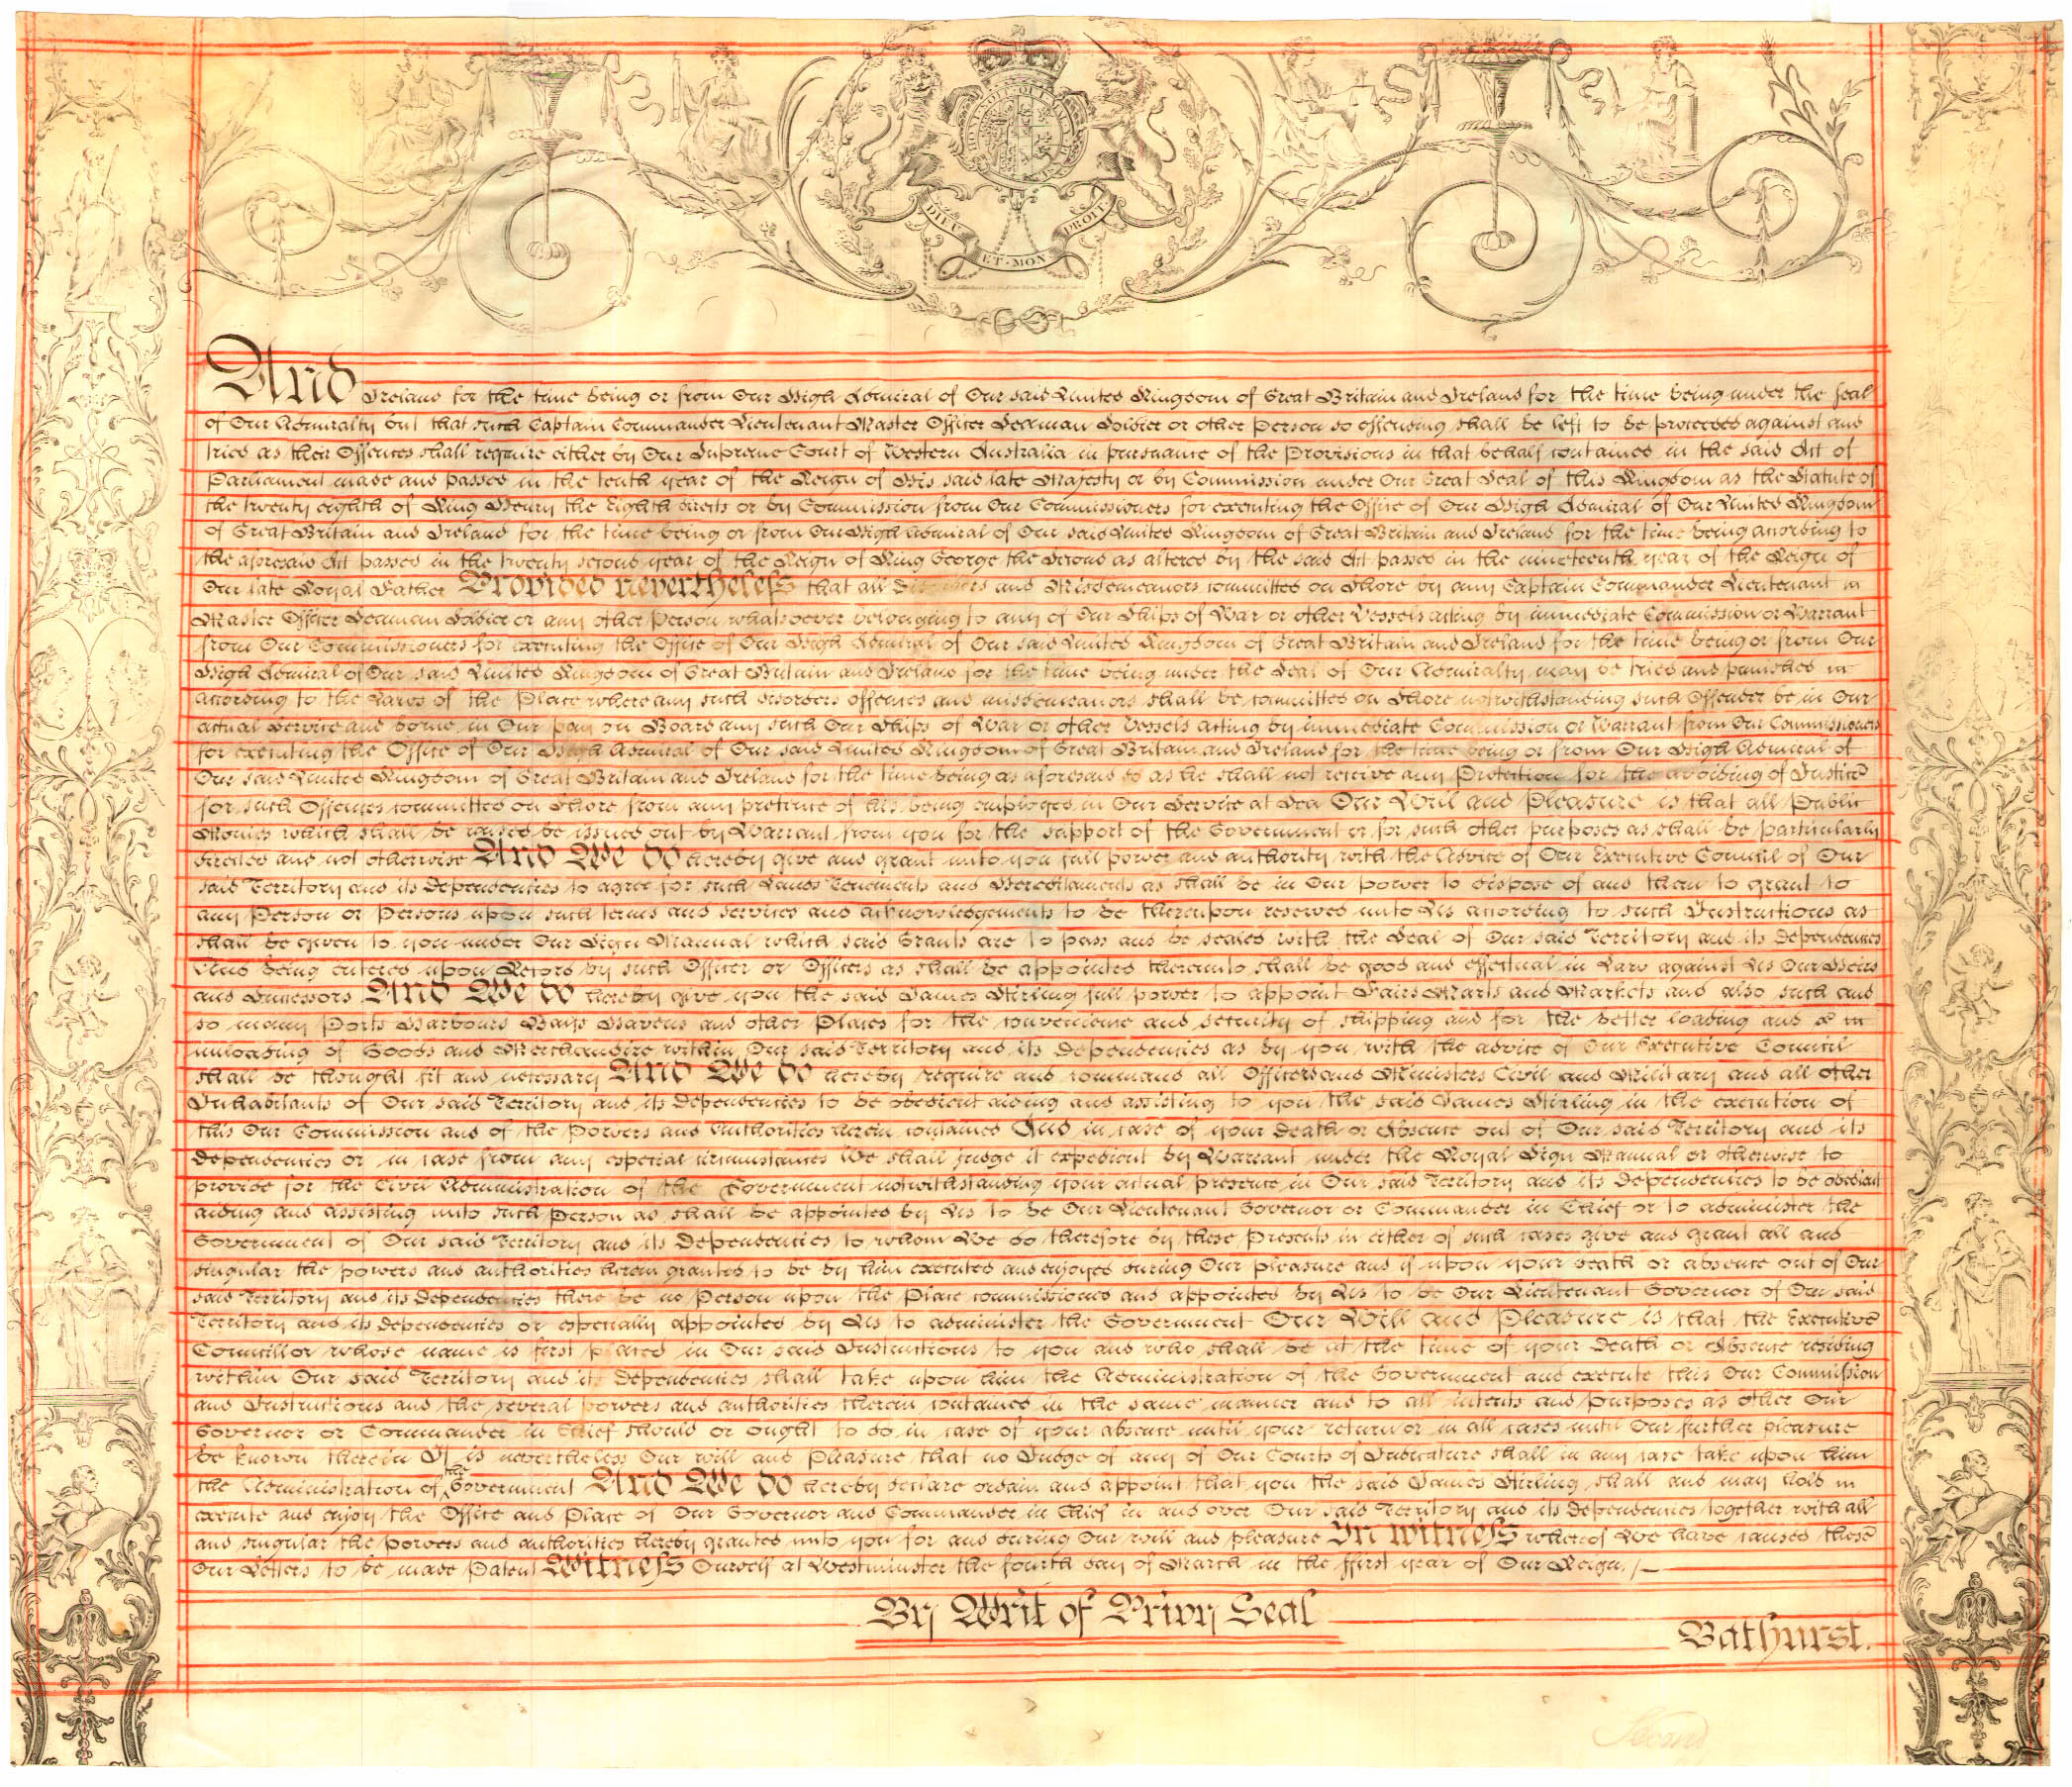 Commission appointing Stirling Governor and Commander-in-Chief 4 March 1831 (UK), p3